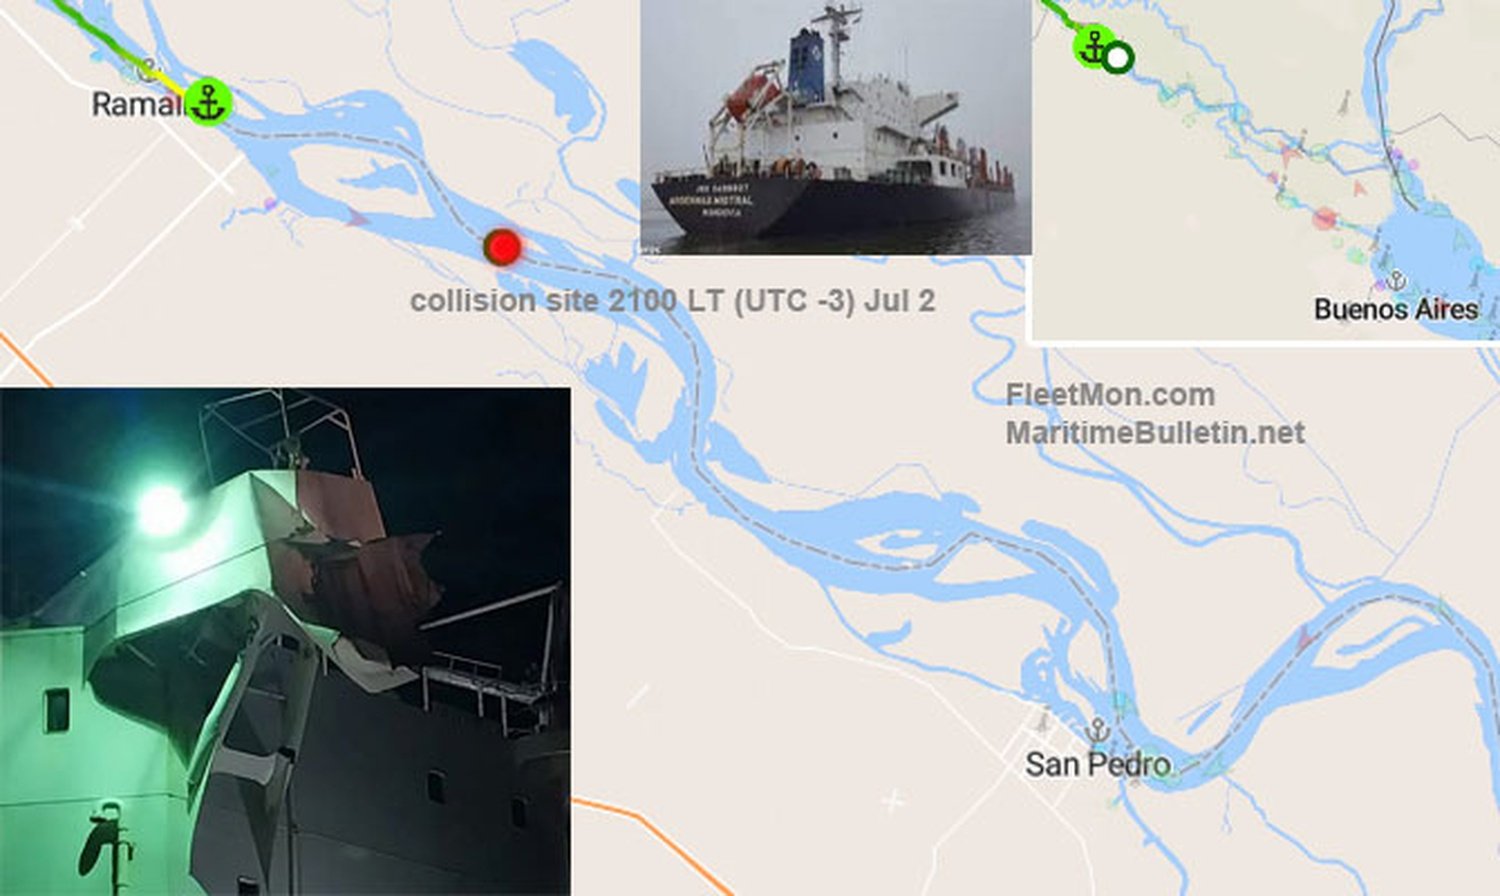 MARITIME: How Bulk carrier collided with a general cargo ship off Ramallo